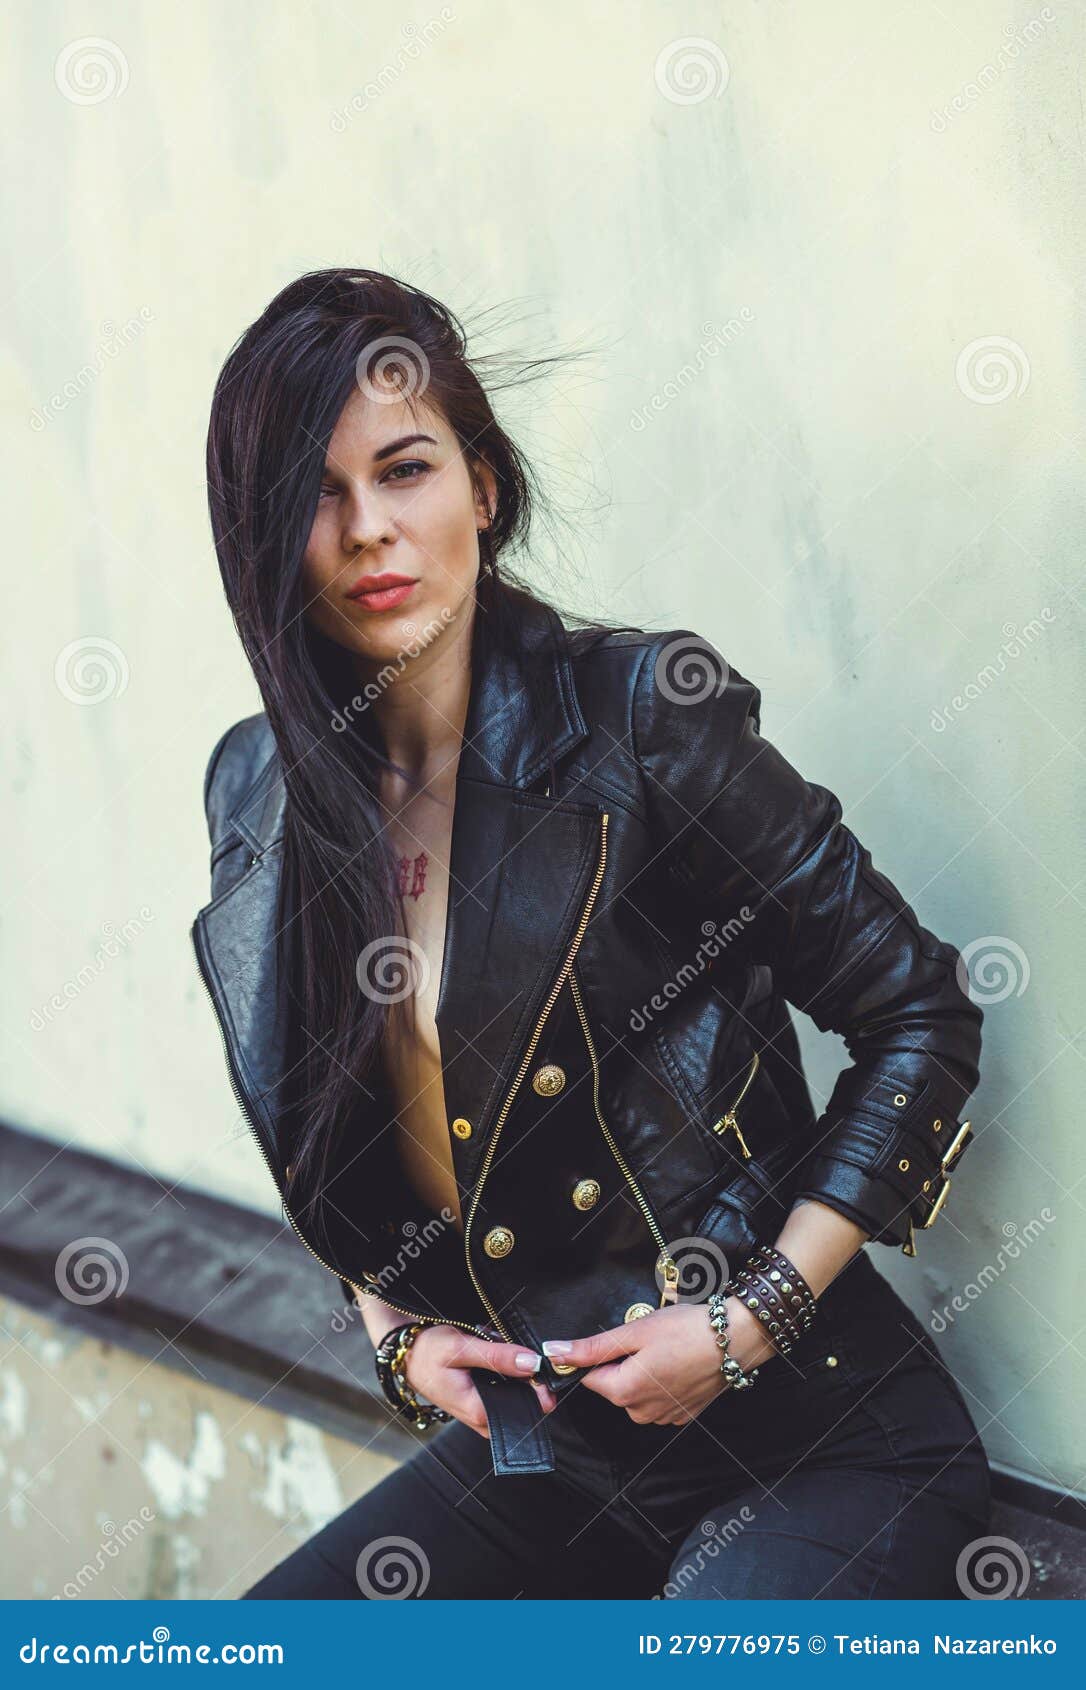 Grunge Woman S Look, Outfit Ideas for 90s Stock Image - Image of ...